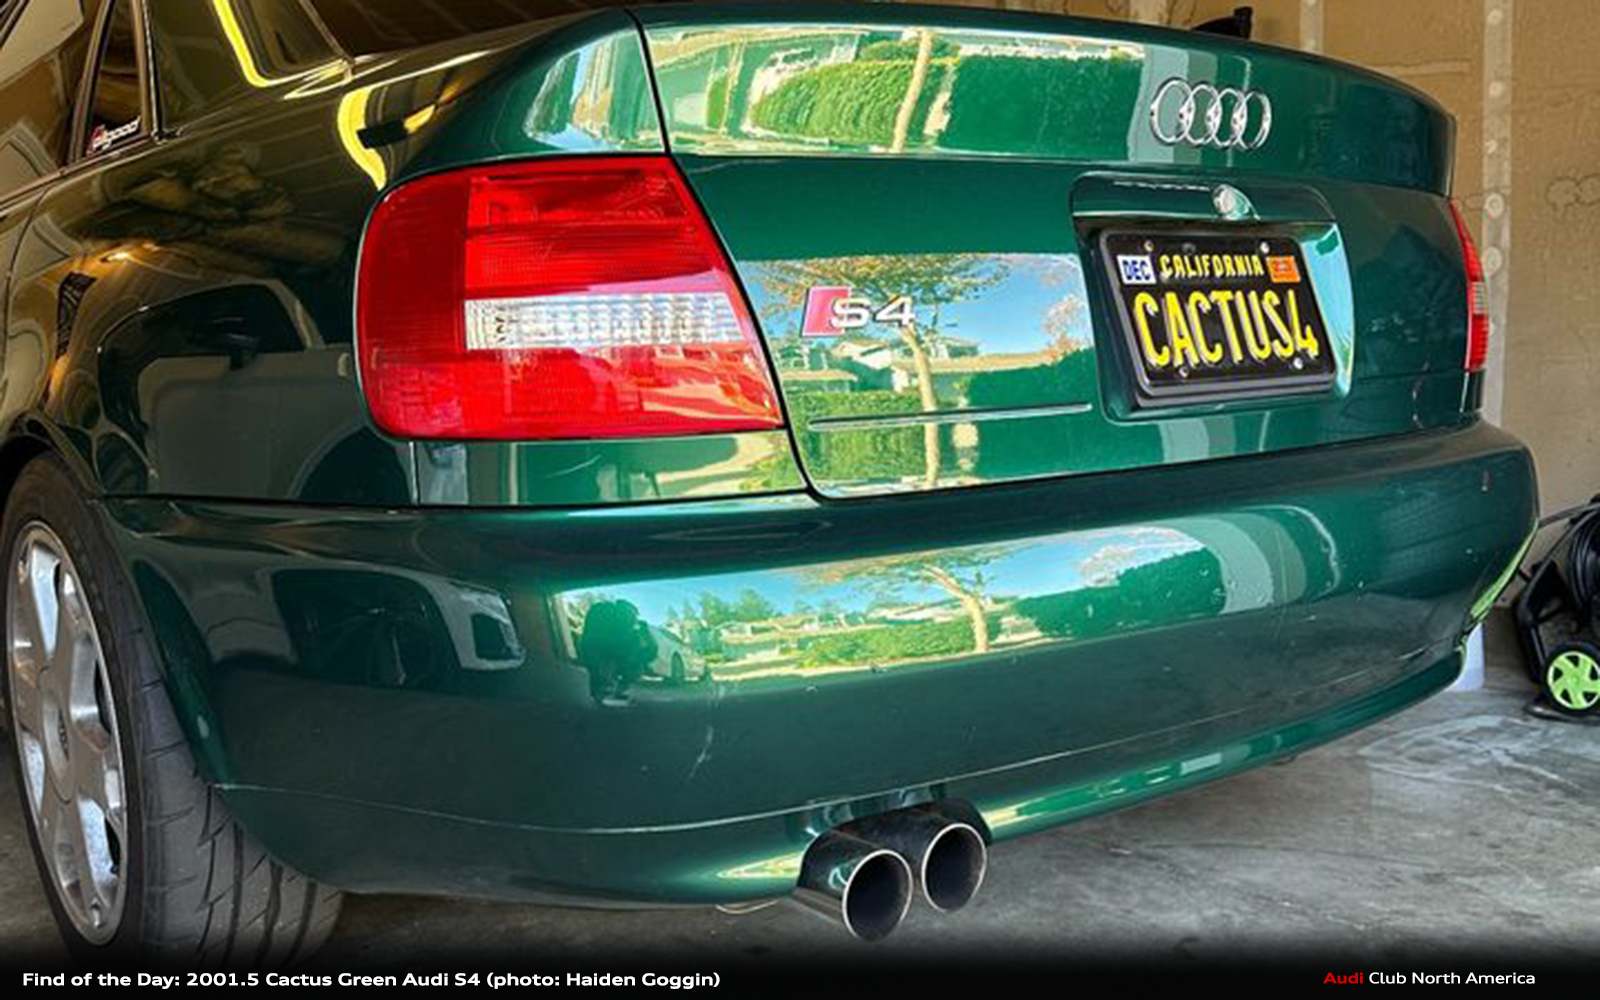 Find of the Day: 2001.5 Cactus Green Audi S4 - Audi Club North America